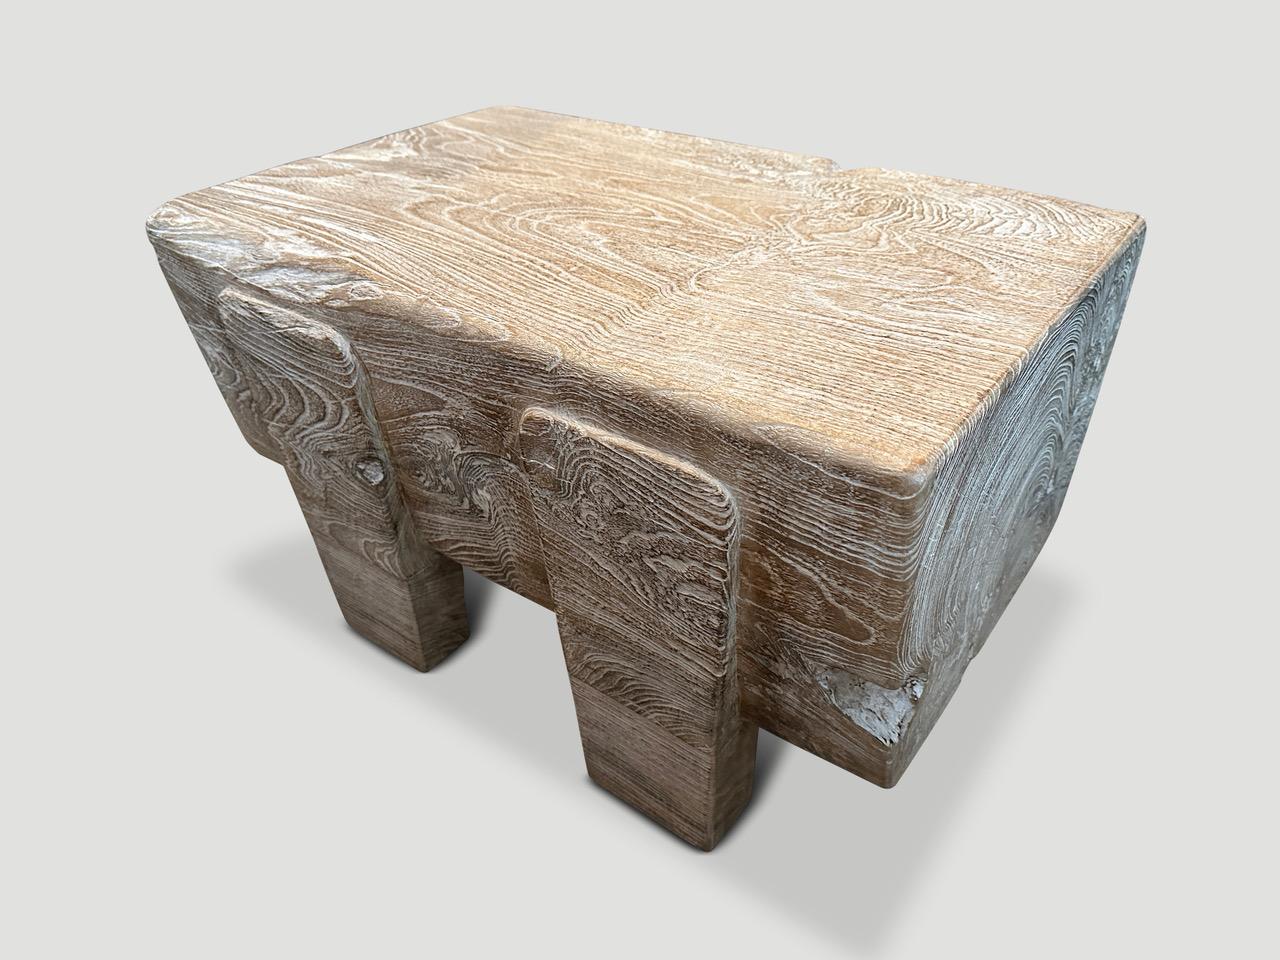 An impressive ten inch thick log floats 5.5” off the floor on minimalist cut out legs. We added a cerused finish revealing the beautiful wood grain. This one of a kind piece can be used as a small coffee table, side table or bench. A butterfly is